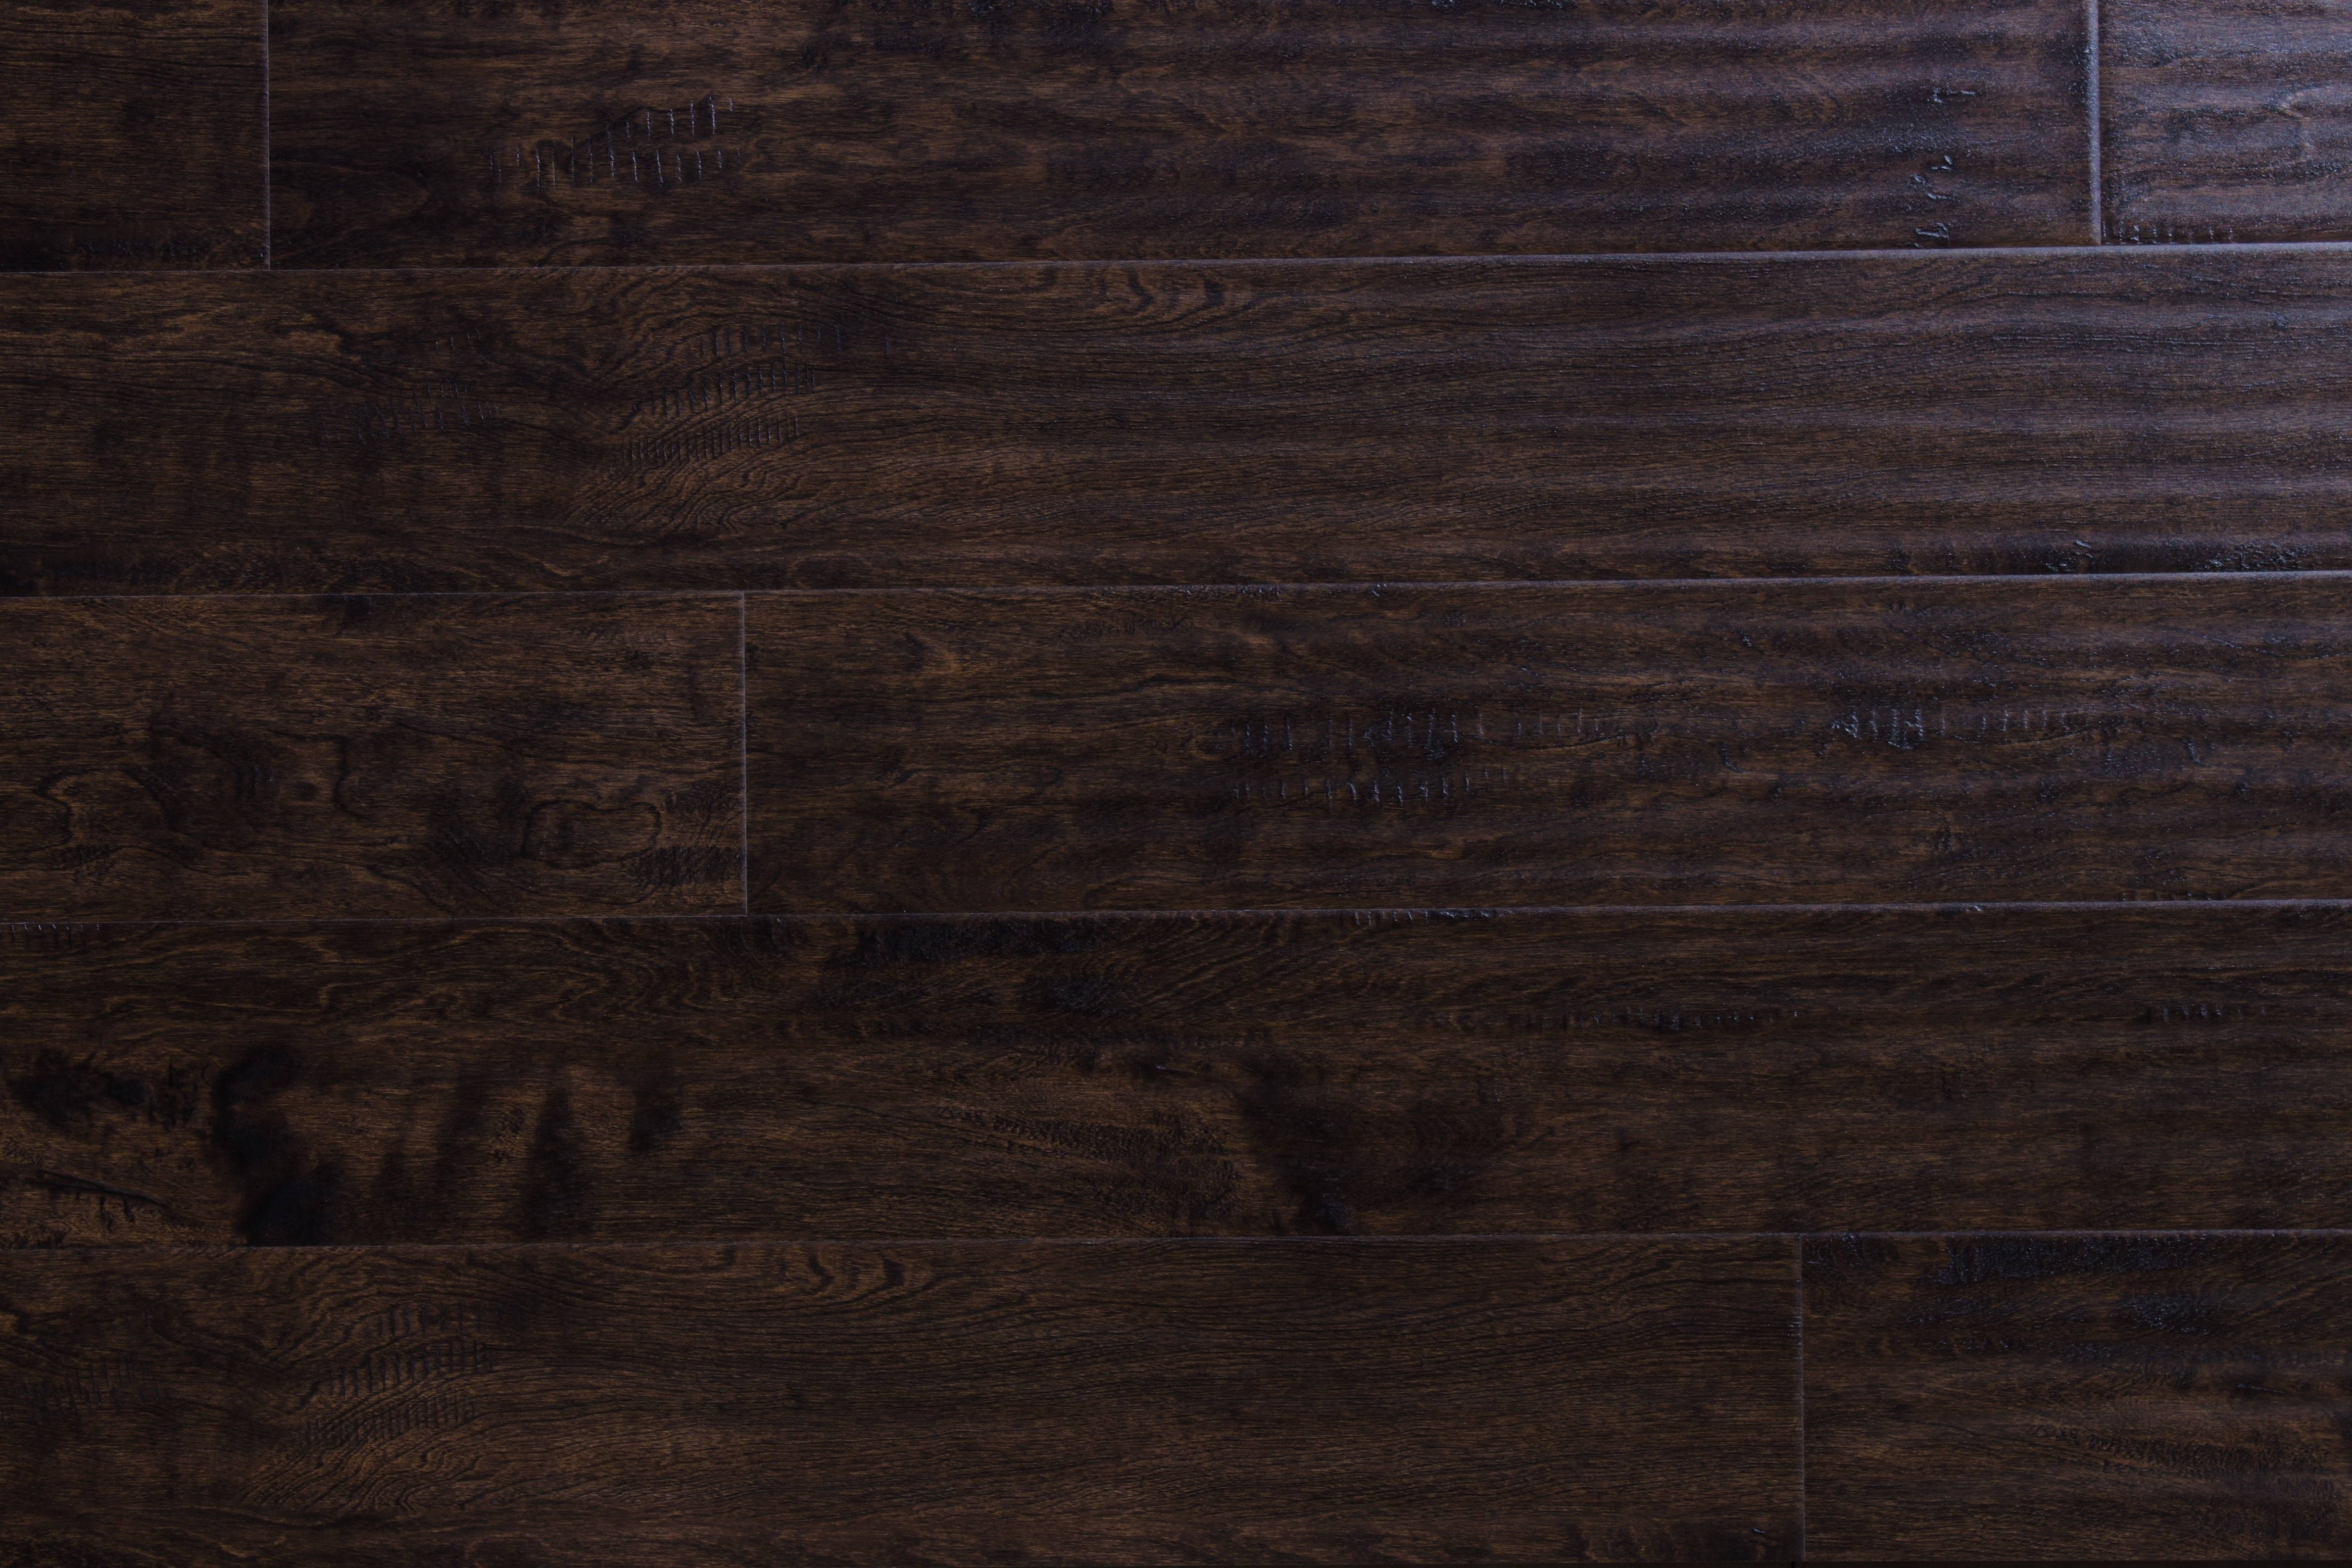 22 attractive Most Popular Engineered Hardwood Flooring Color 2022 free download most popular engineered hardwood flooring color of wood flooring free samples available at builddirecta within tailor multi gb 5874277bb8d3c